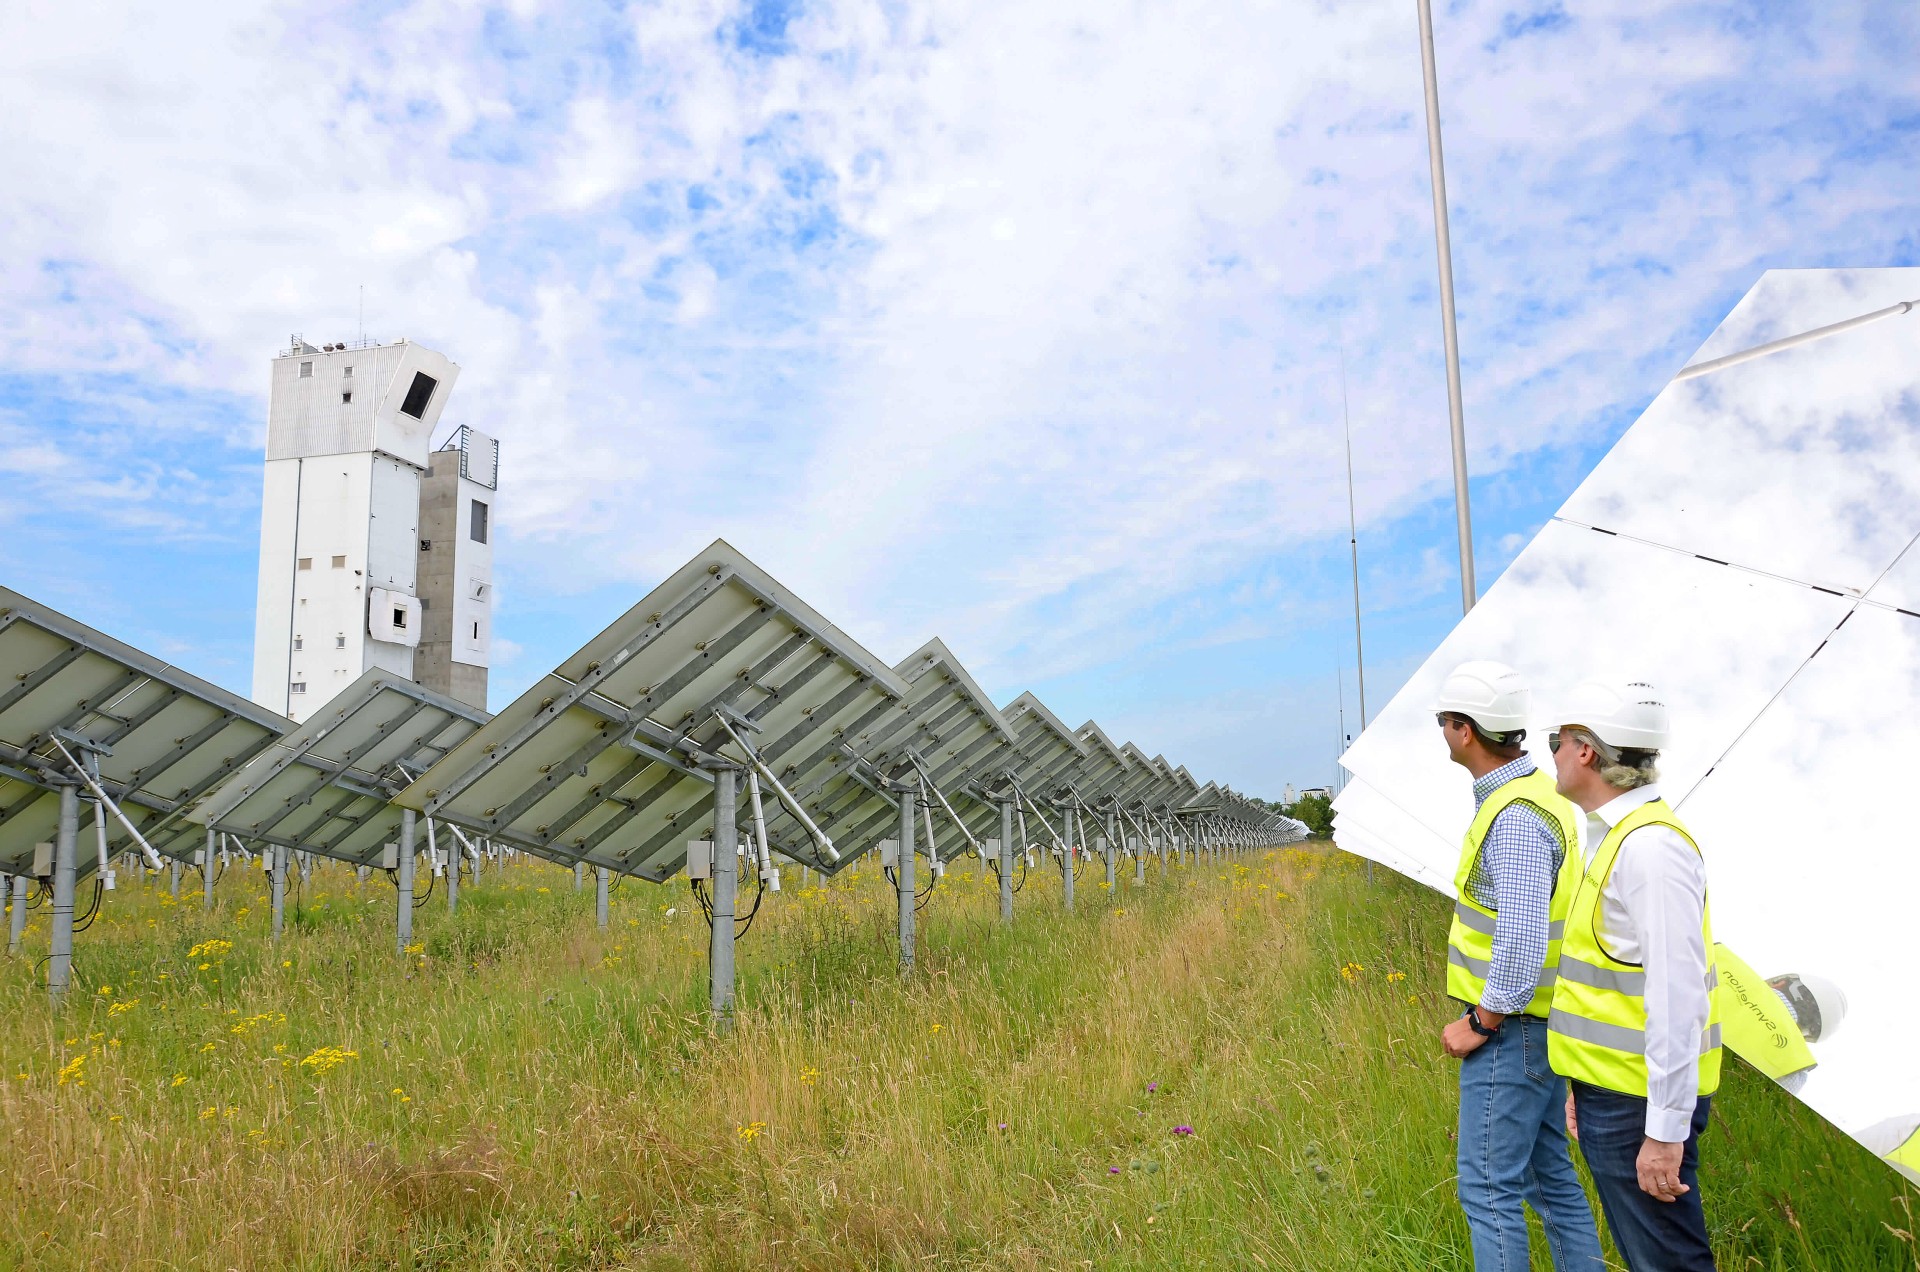 synhelion - solar tower and mirrorfield at dlr - furler - ambrosetti